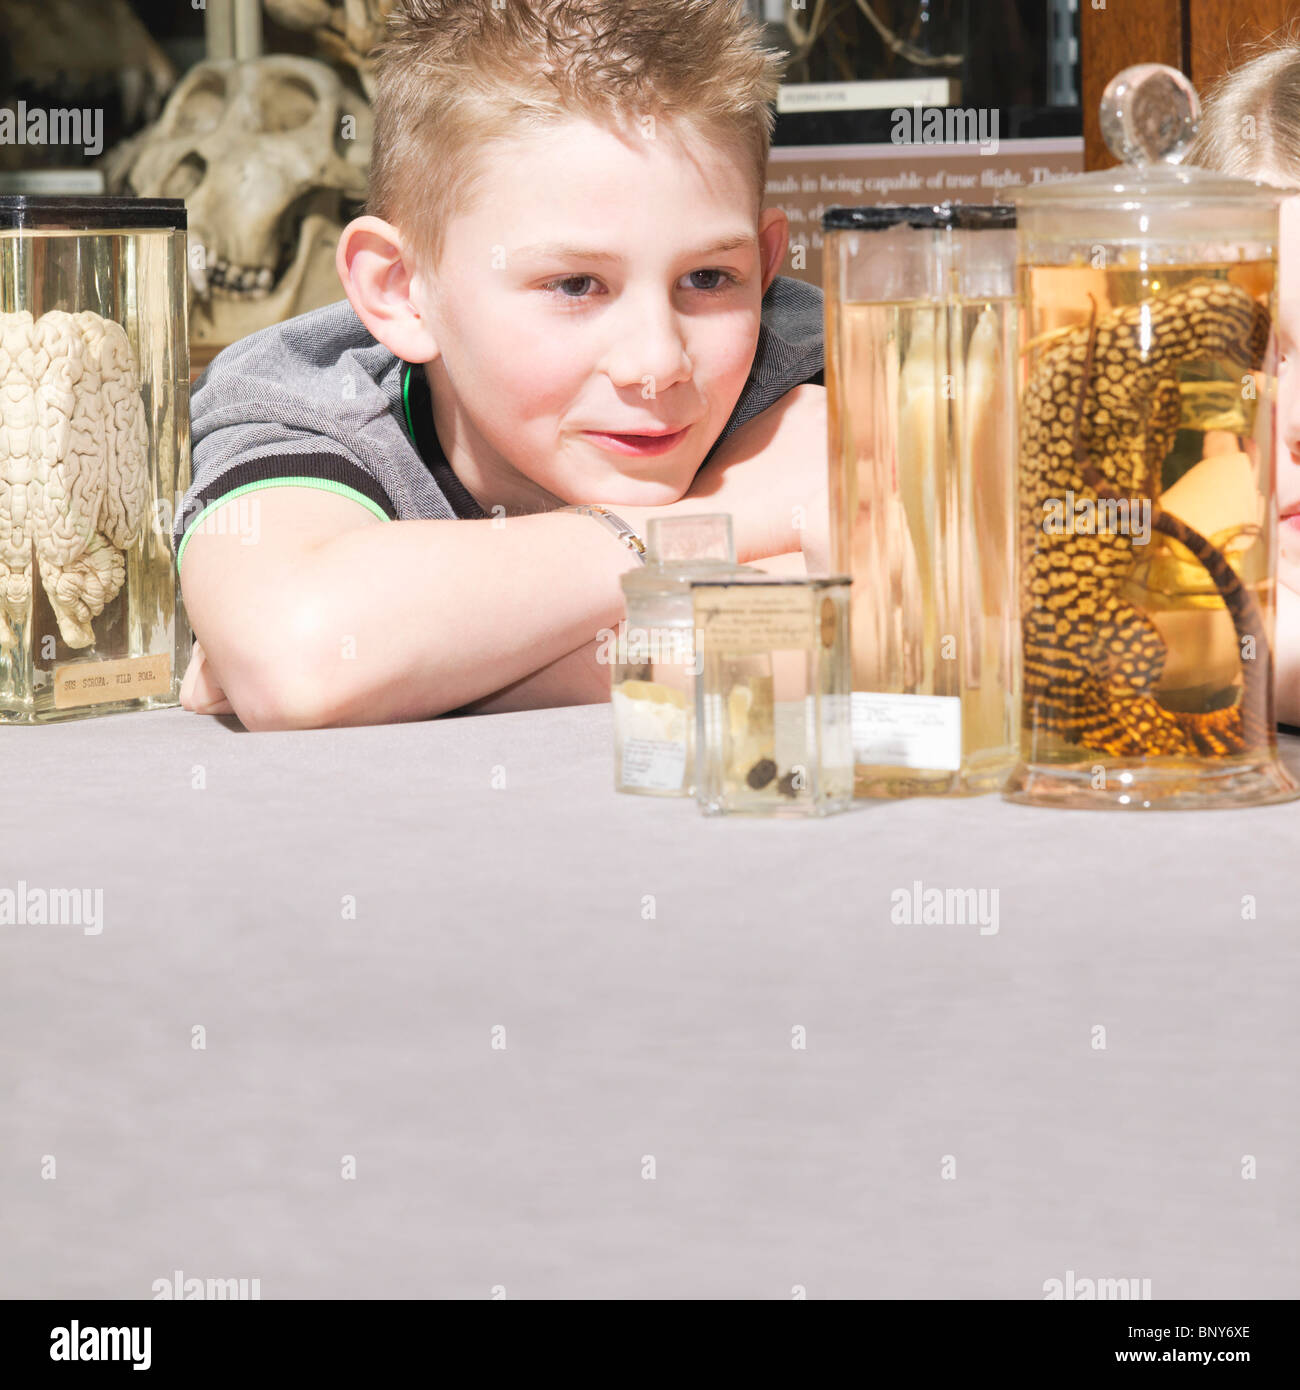 Boy looking at animals in jars Stock Photo